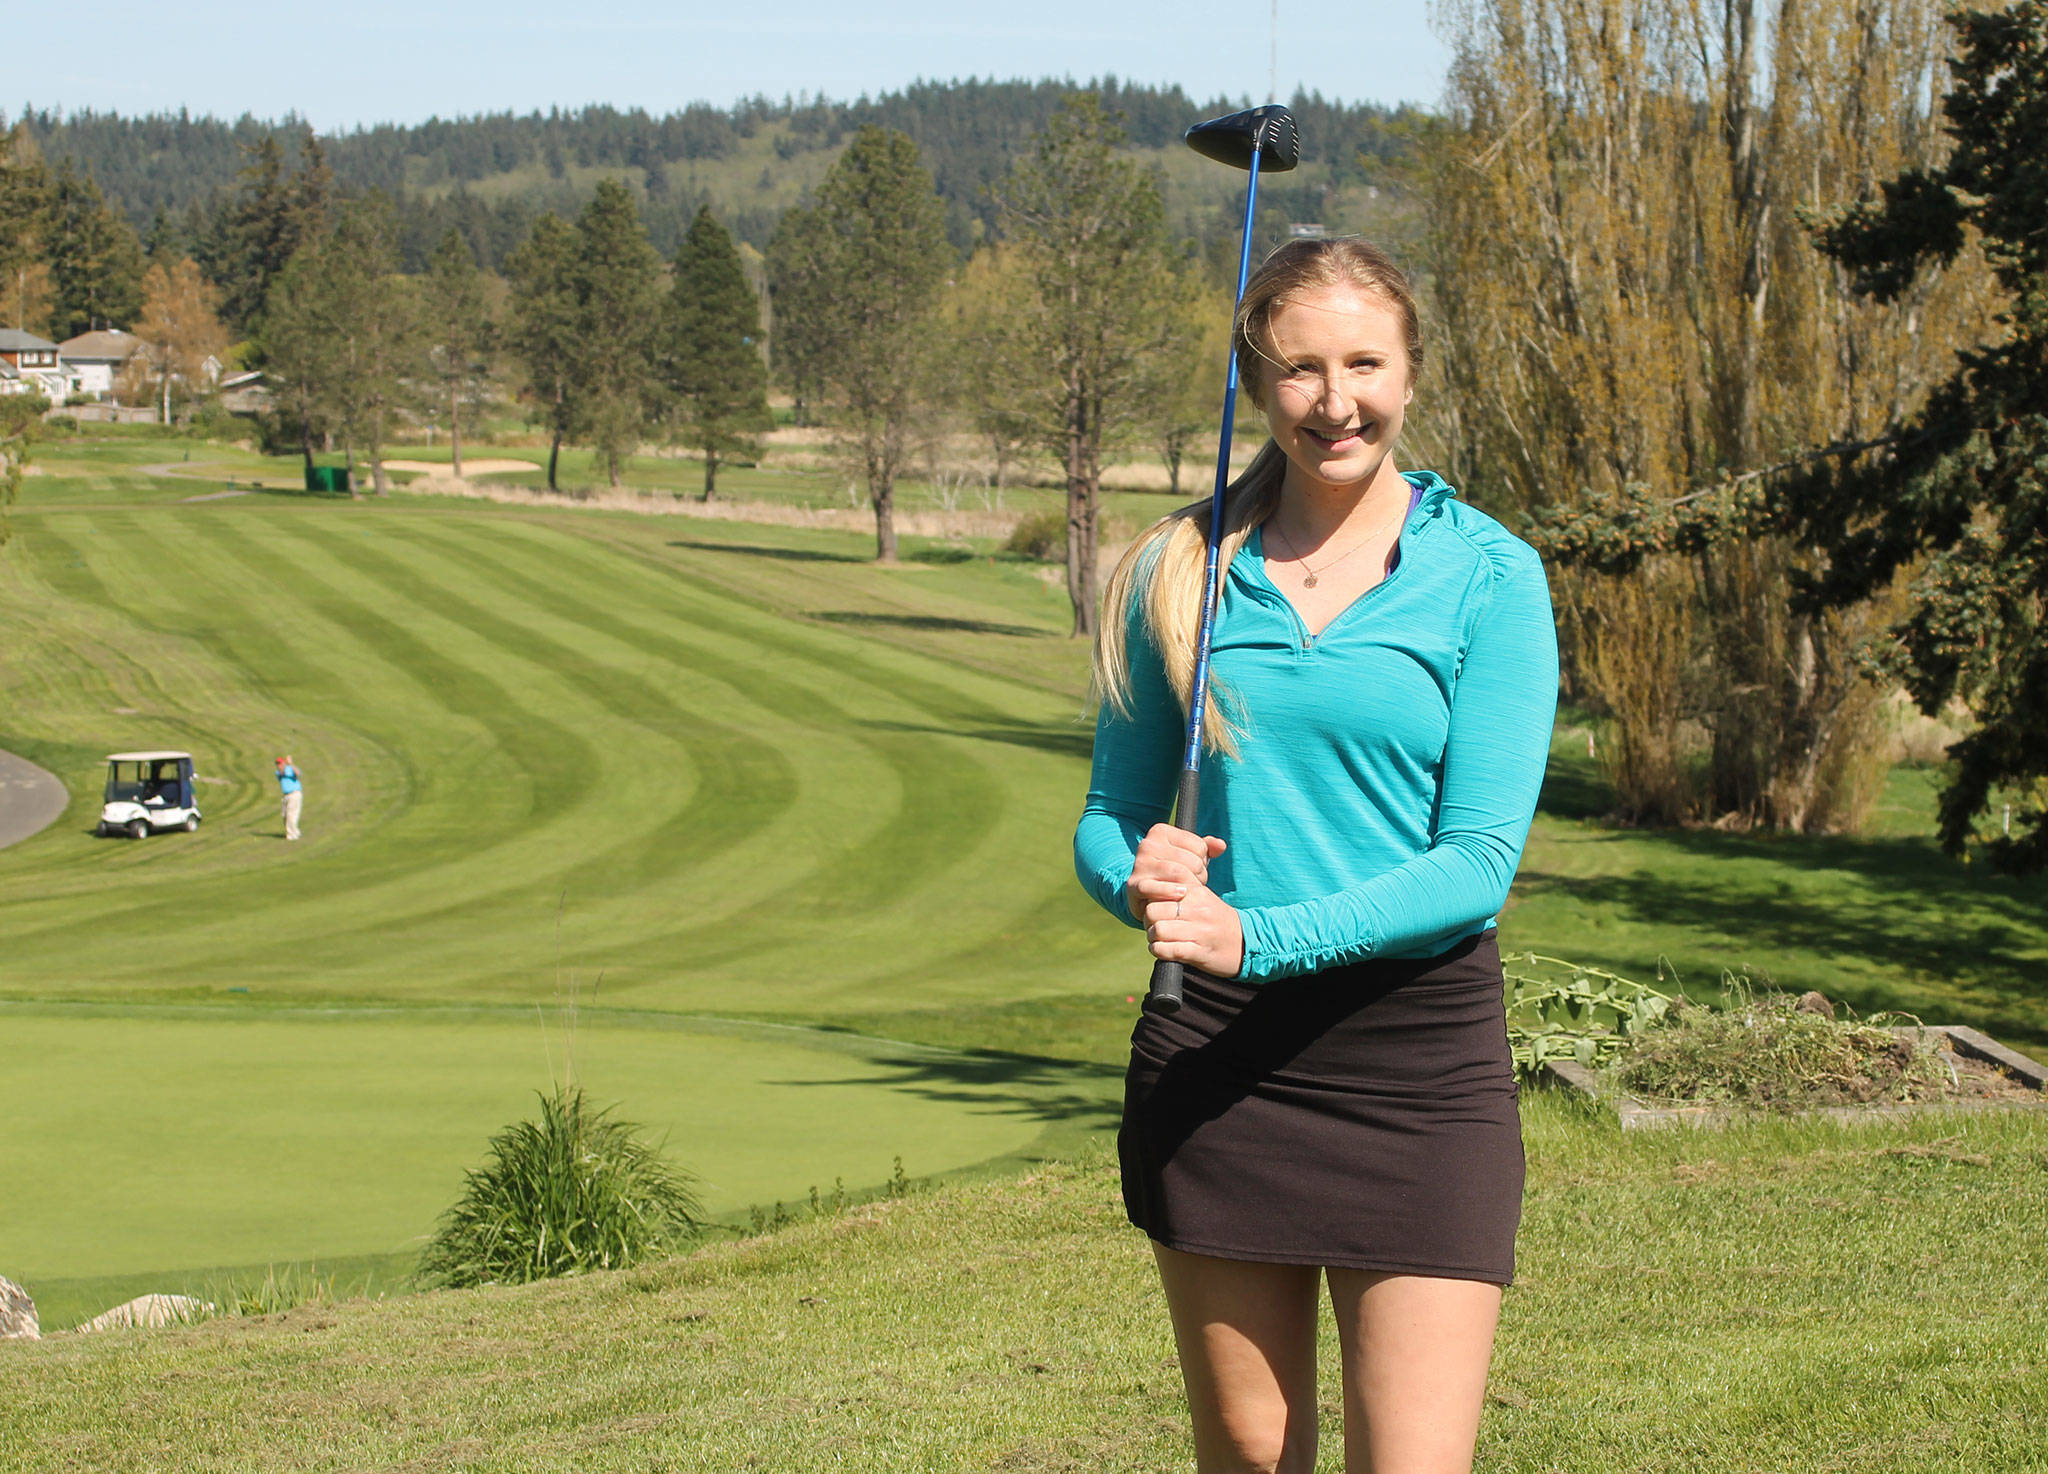 Kolby Heggenes has placed second in the state girls golf tournament the past two seasons. (Photo by Jim Waller/Whidbey News Group)